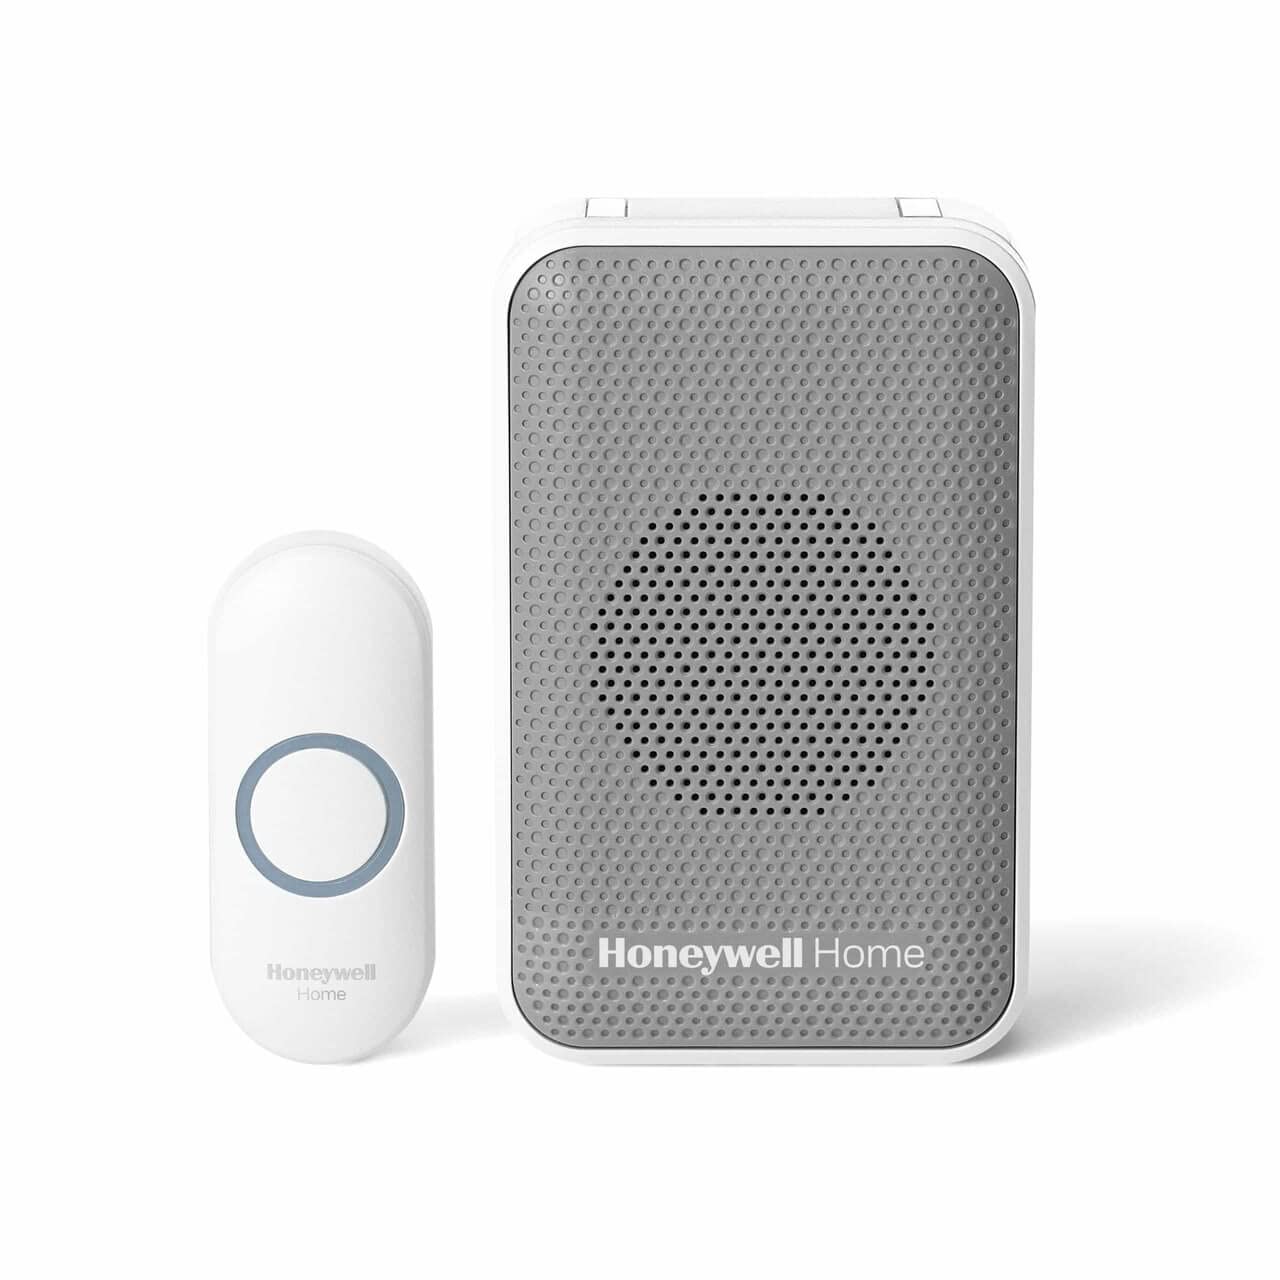 Honeywell Series 3 Portable Wireless Doorbell with Chime and Push Button